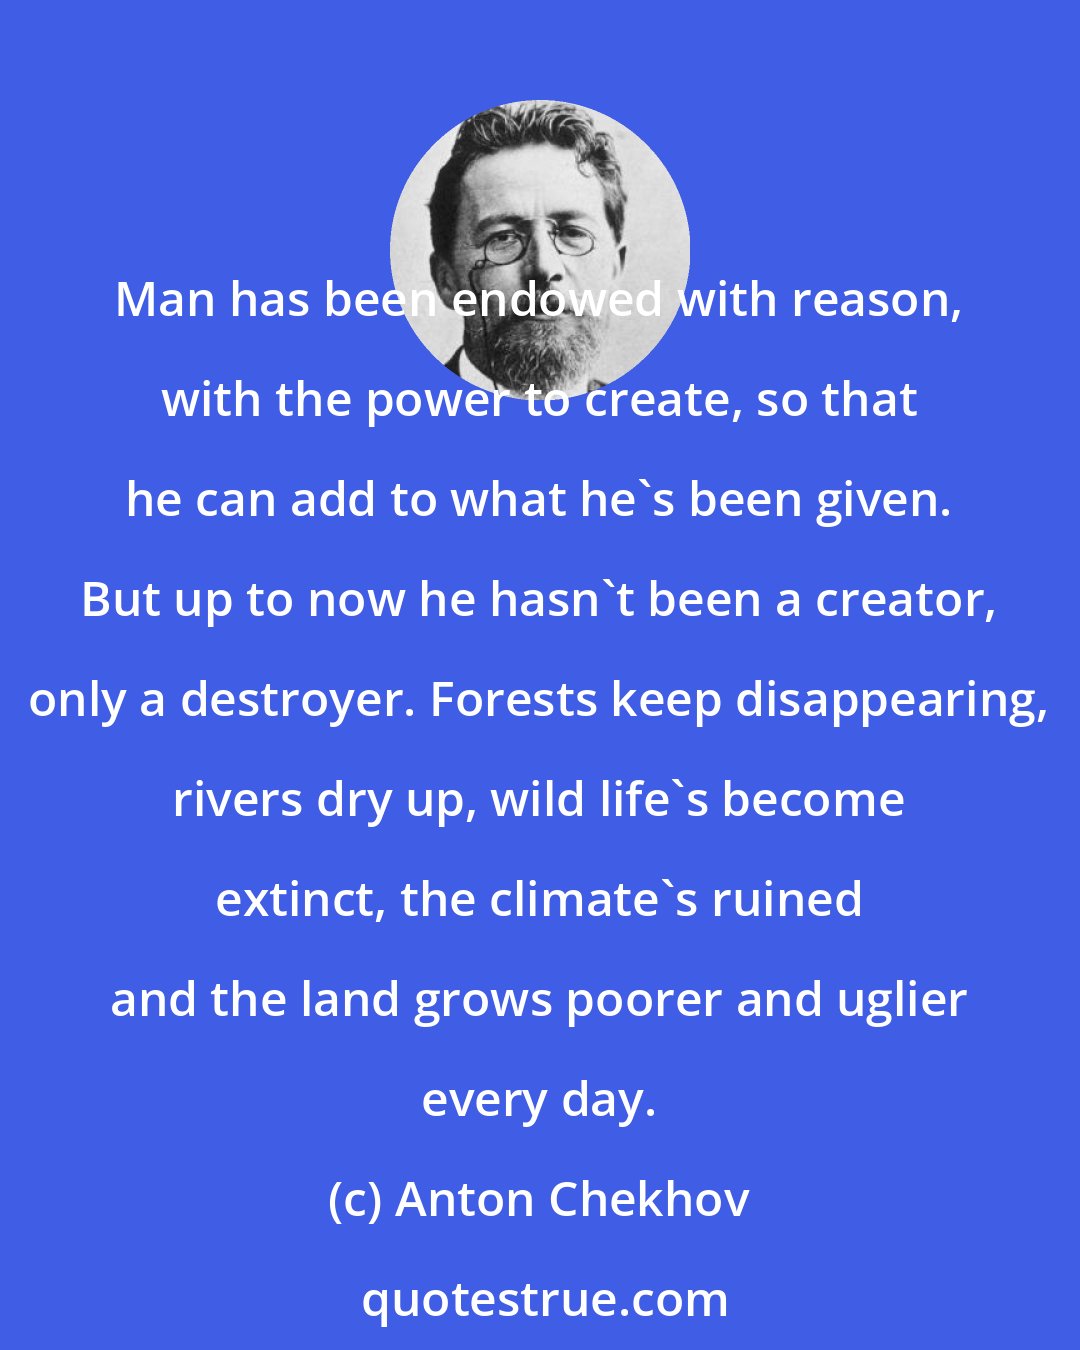 Anton Chekhov: Man has been endowed with reason, with the power to create, so that he can add to what he's been given. But up to now he hasn't been a creator, only a destroyer. Forests keep disappearing, rivers dry up, wild life's become extinct, the climate's ruined and the land grows poorer and uglier every day.